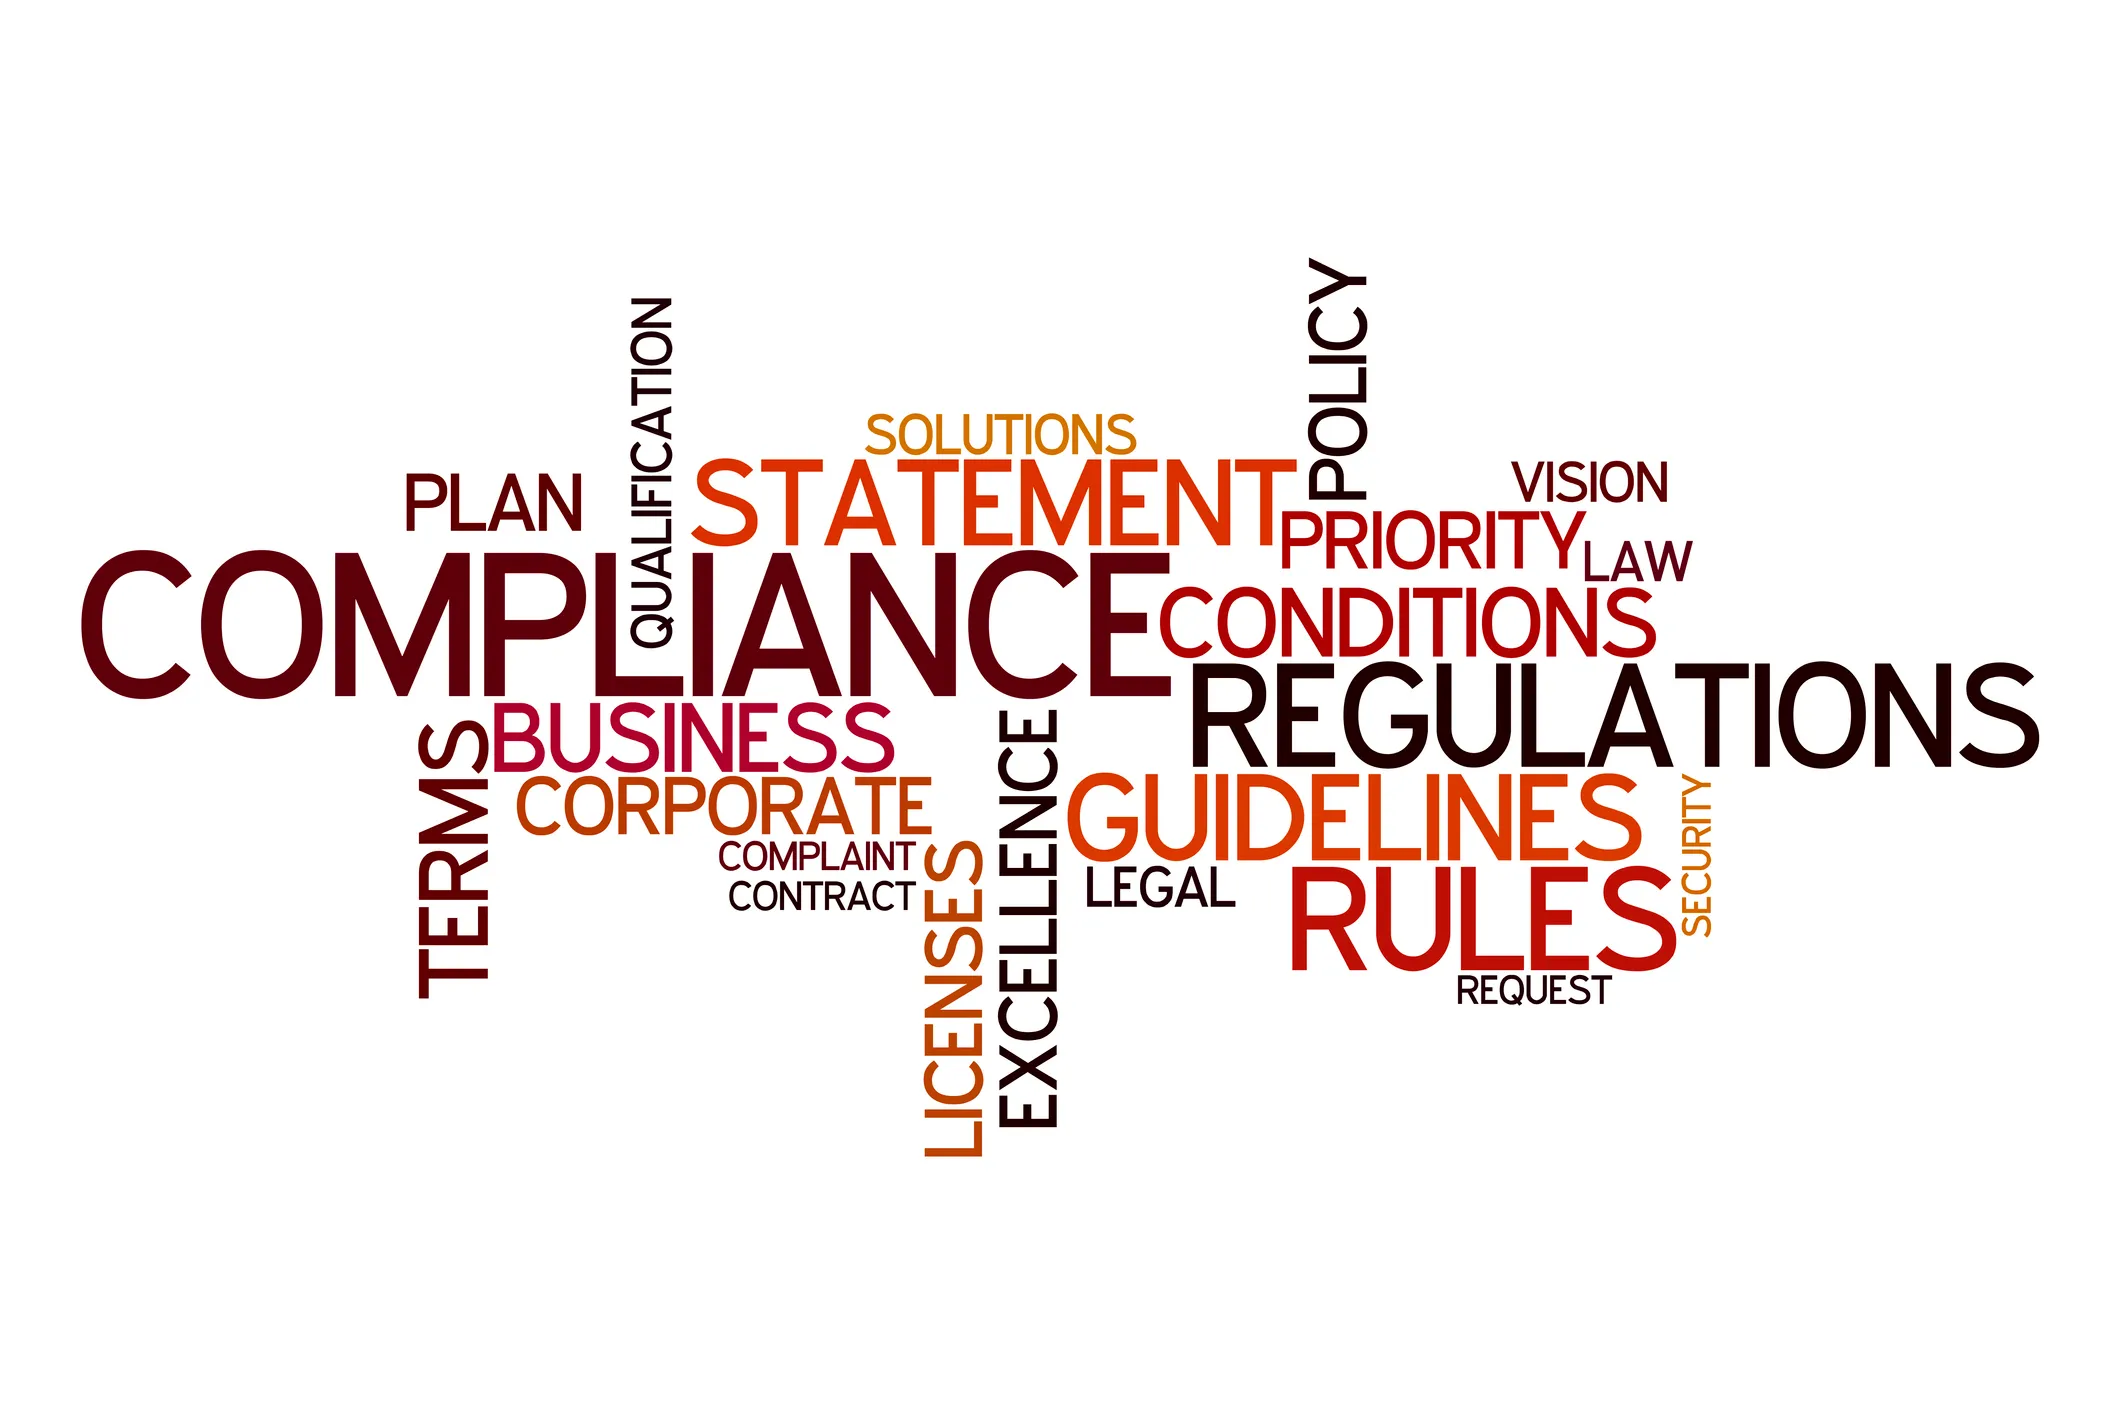 A word cloud for compliance priorities, including rules, regulations, and guidelines.